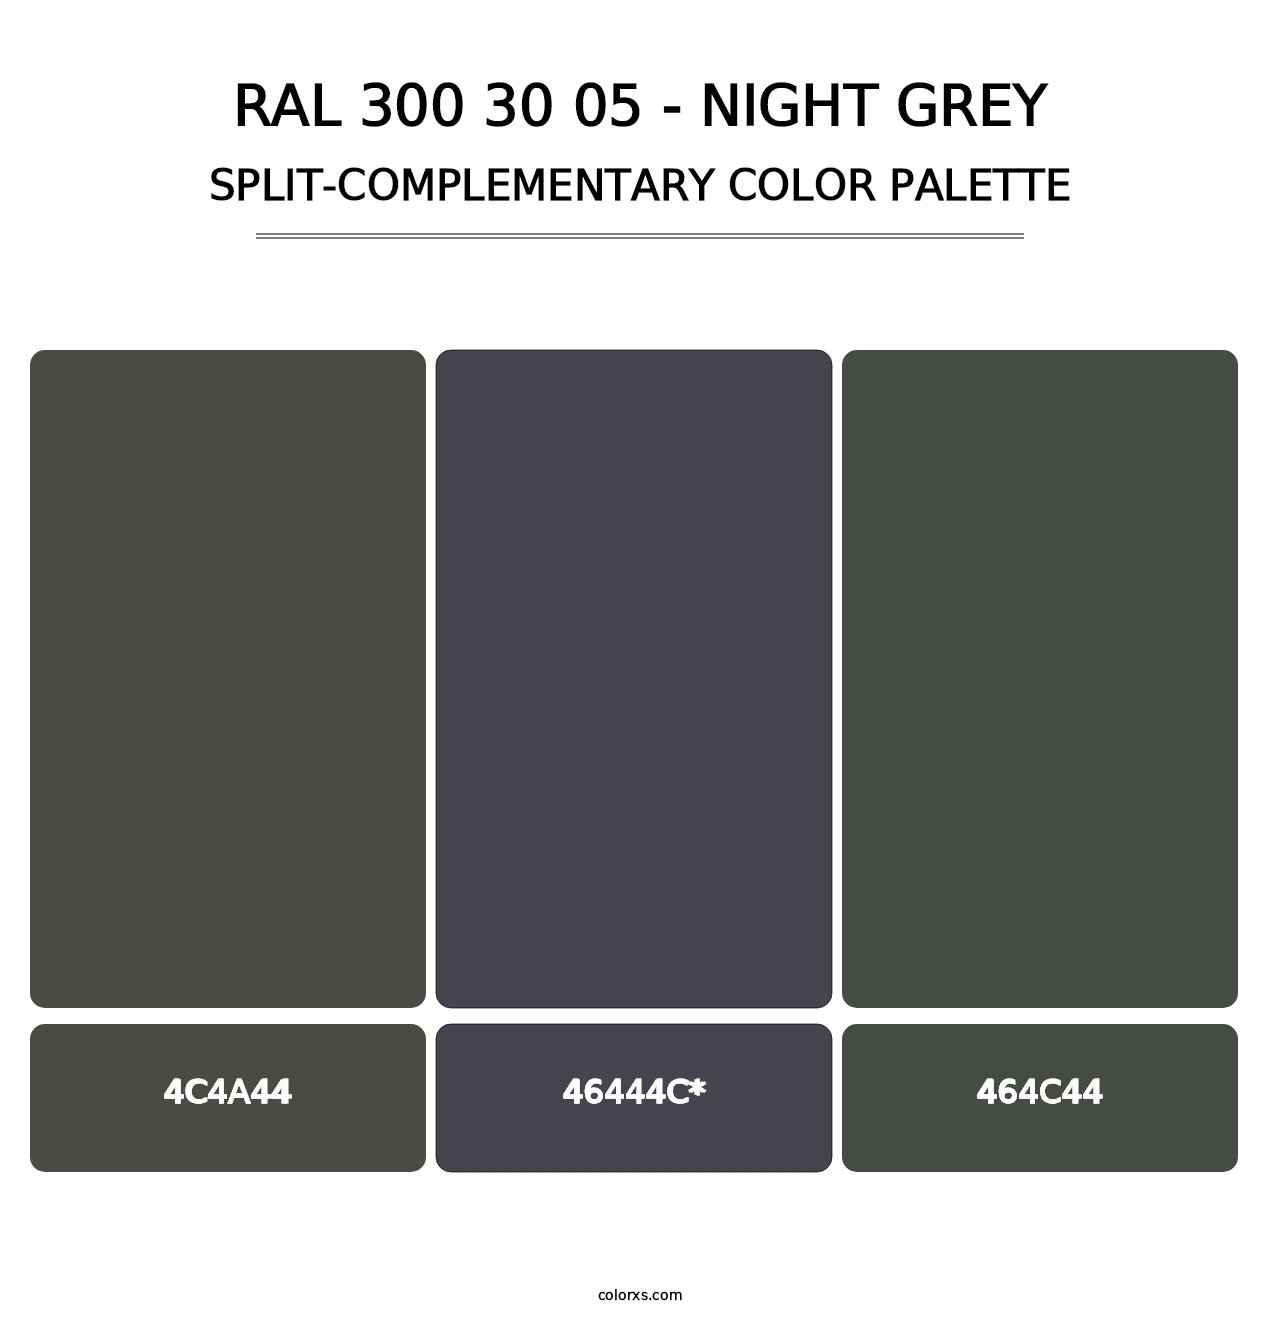 RAL 300 30 05 - Night Grey - Split-Complementary Color Palette